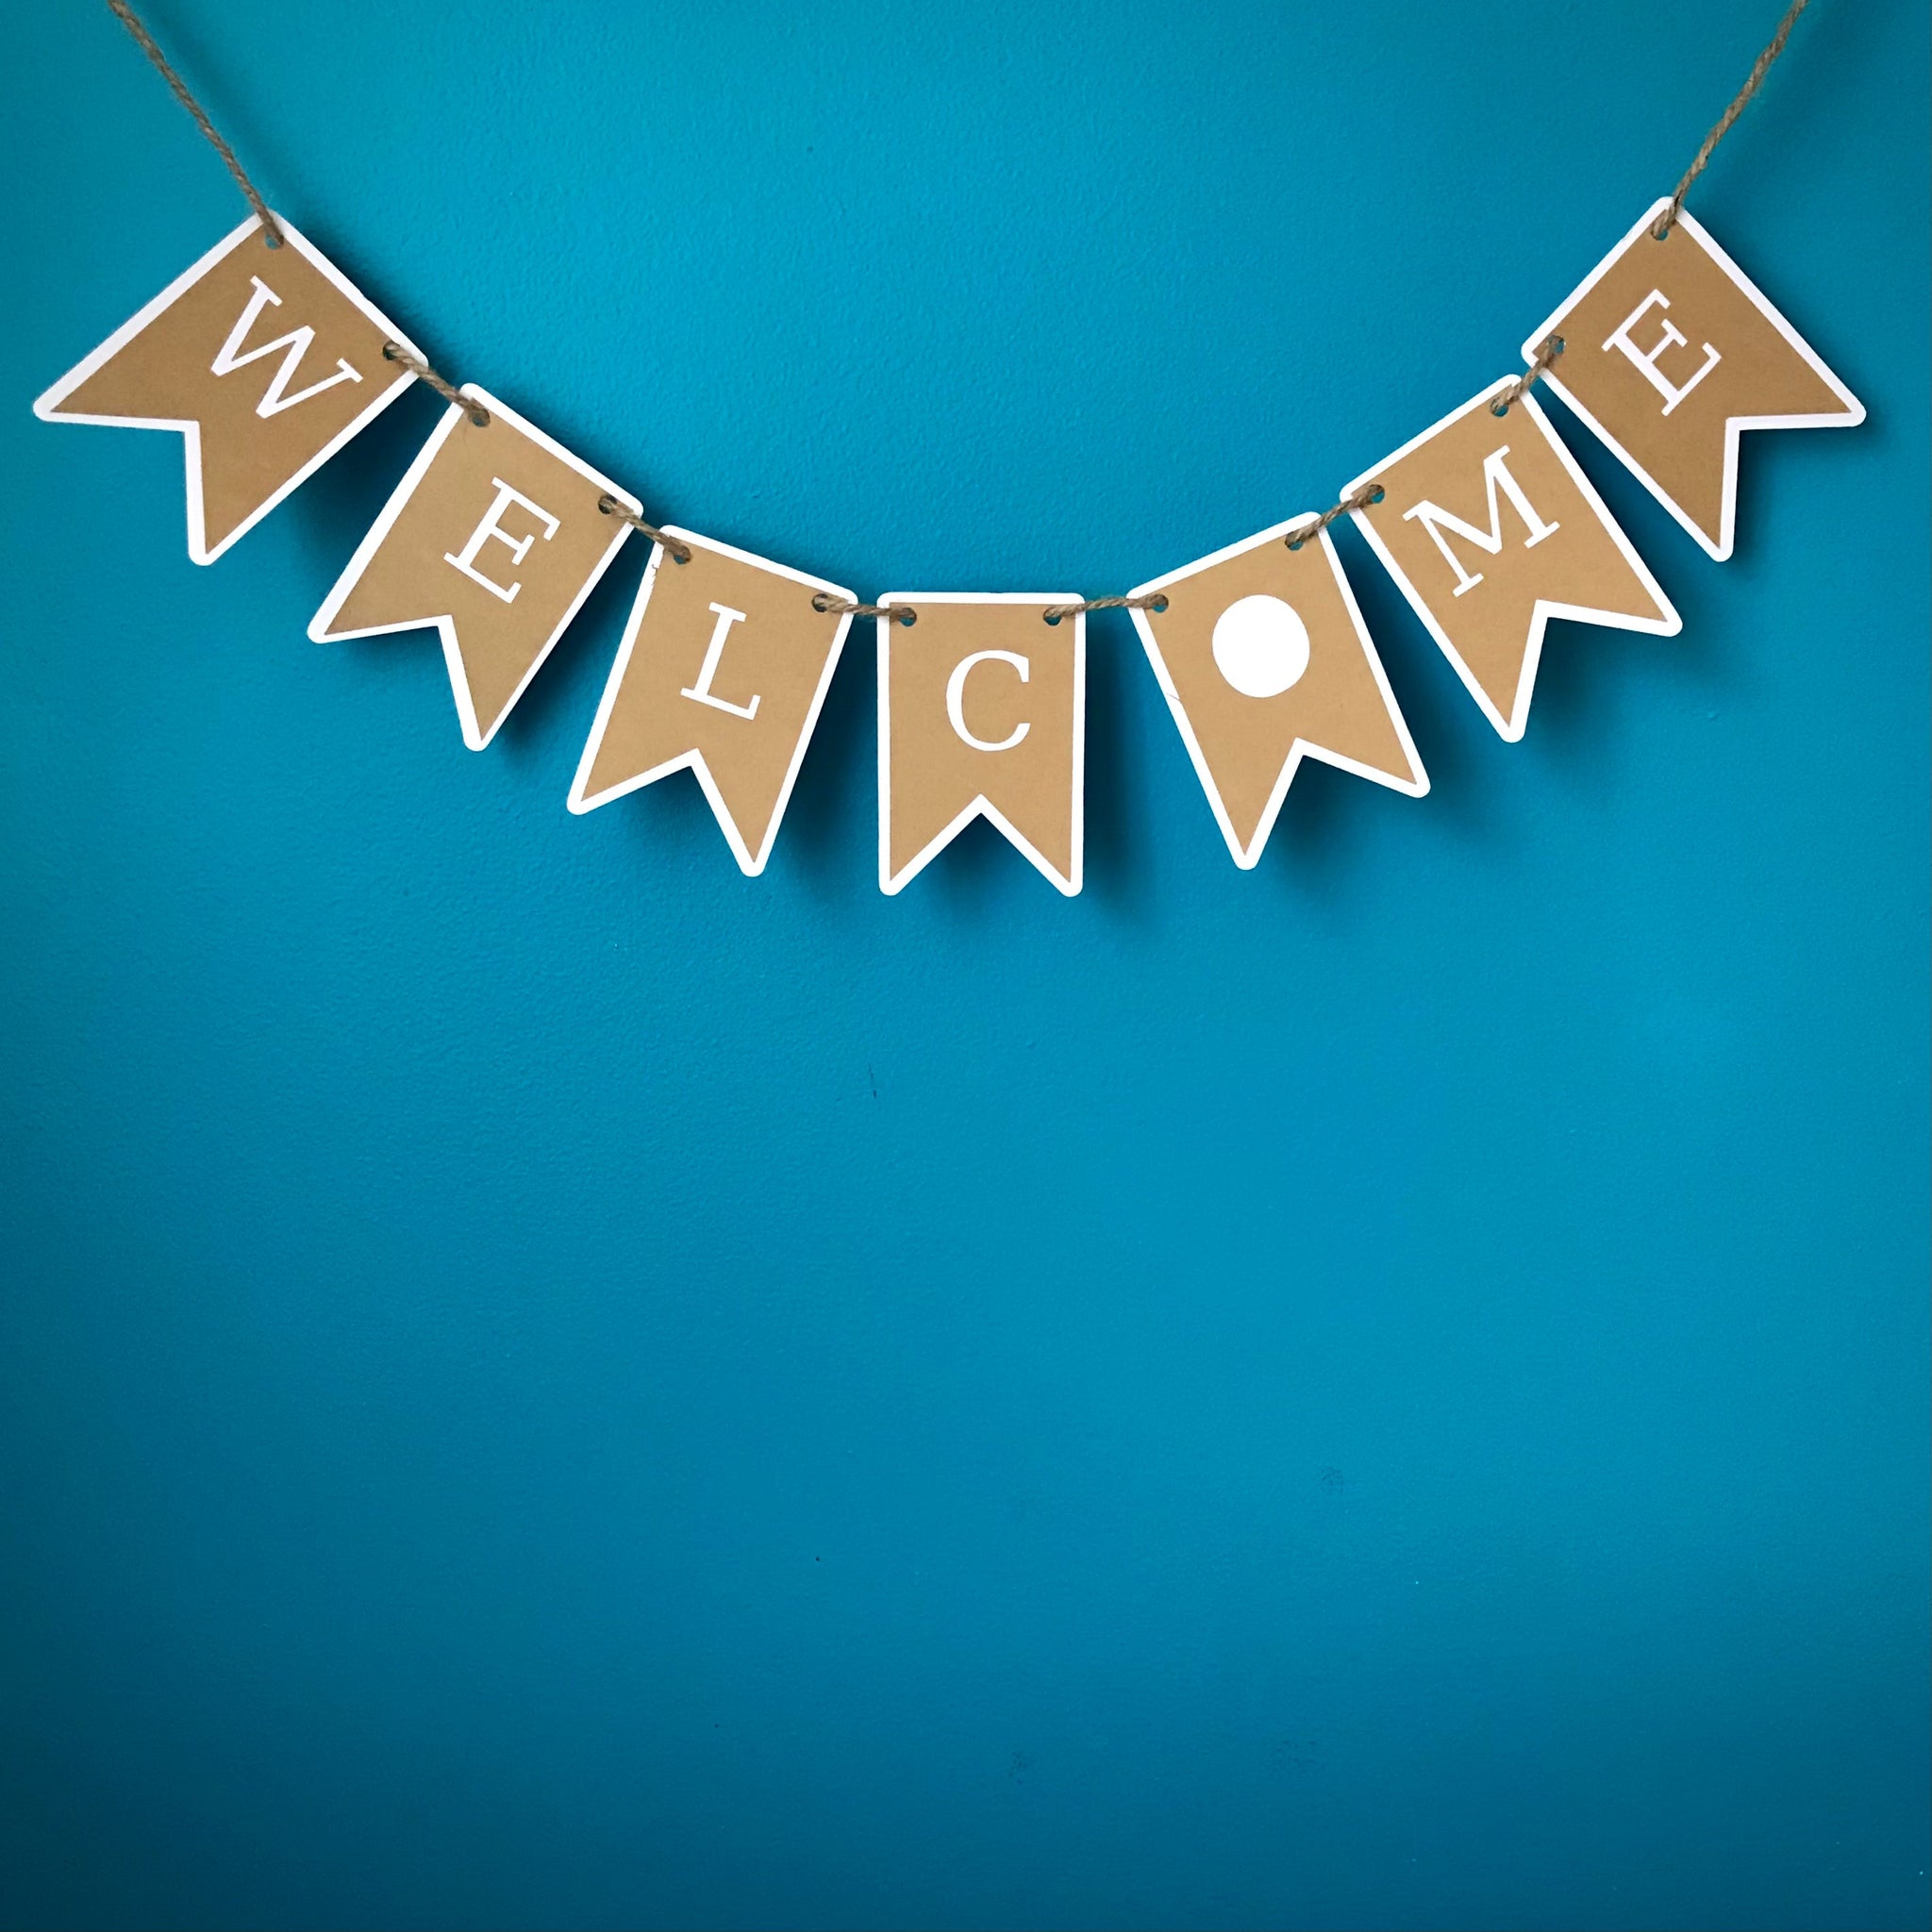 A Welcome banner, shown cut from two layers of white and kraft brown paper, is shown hung on hemp cord against a blue backgroung